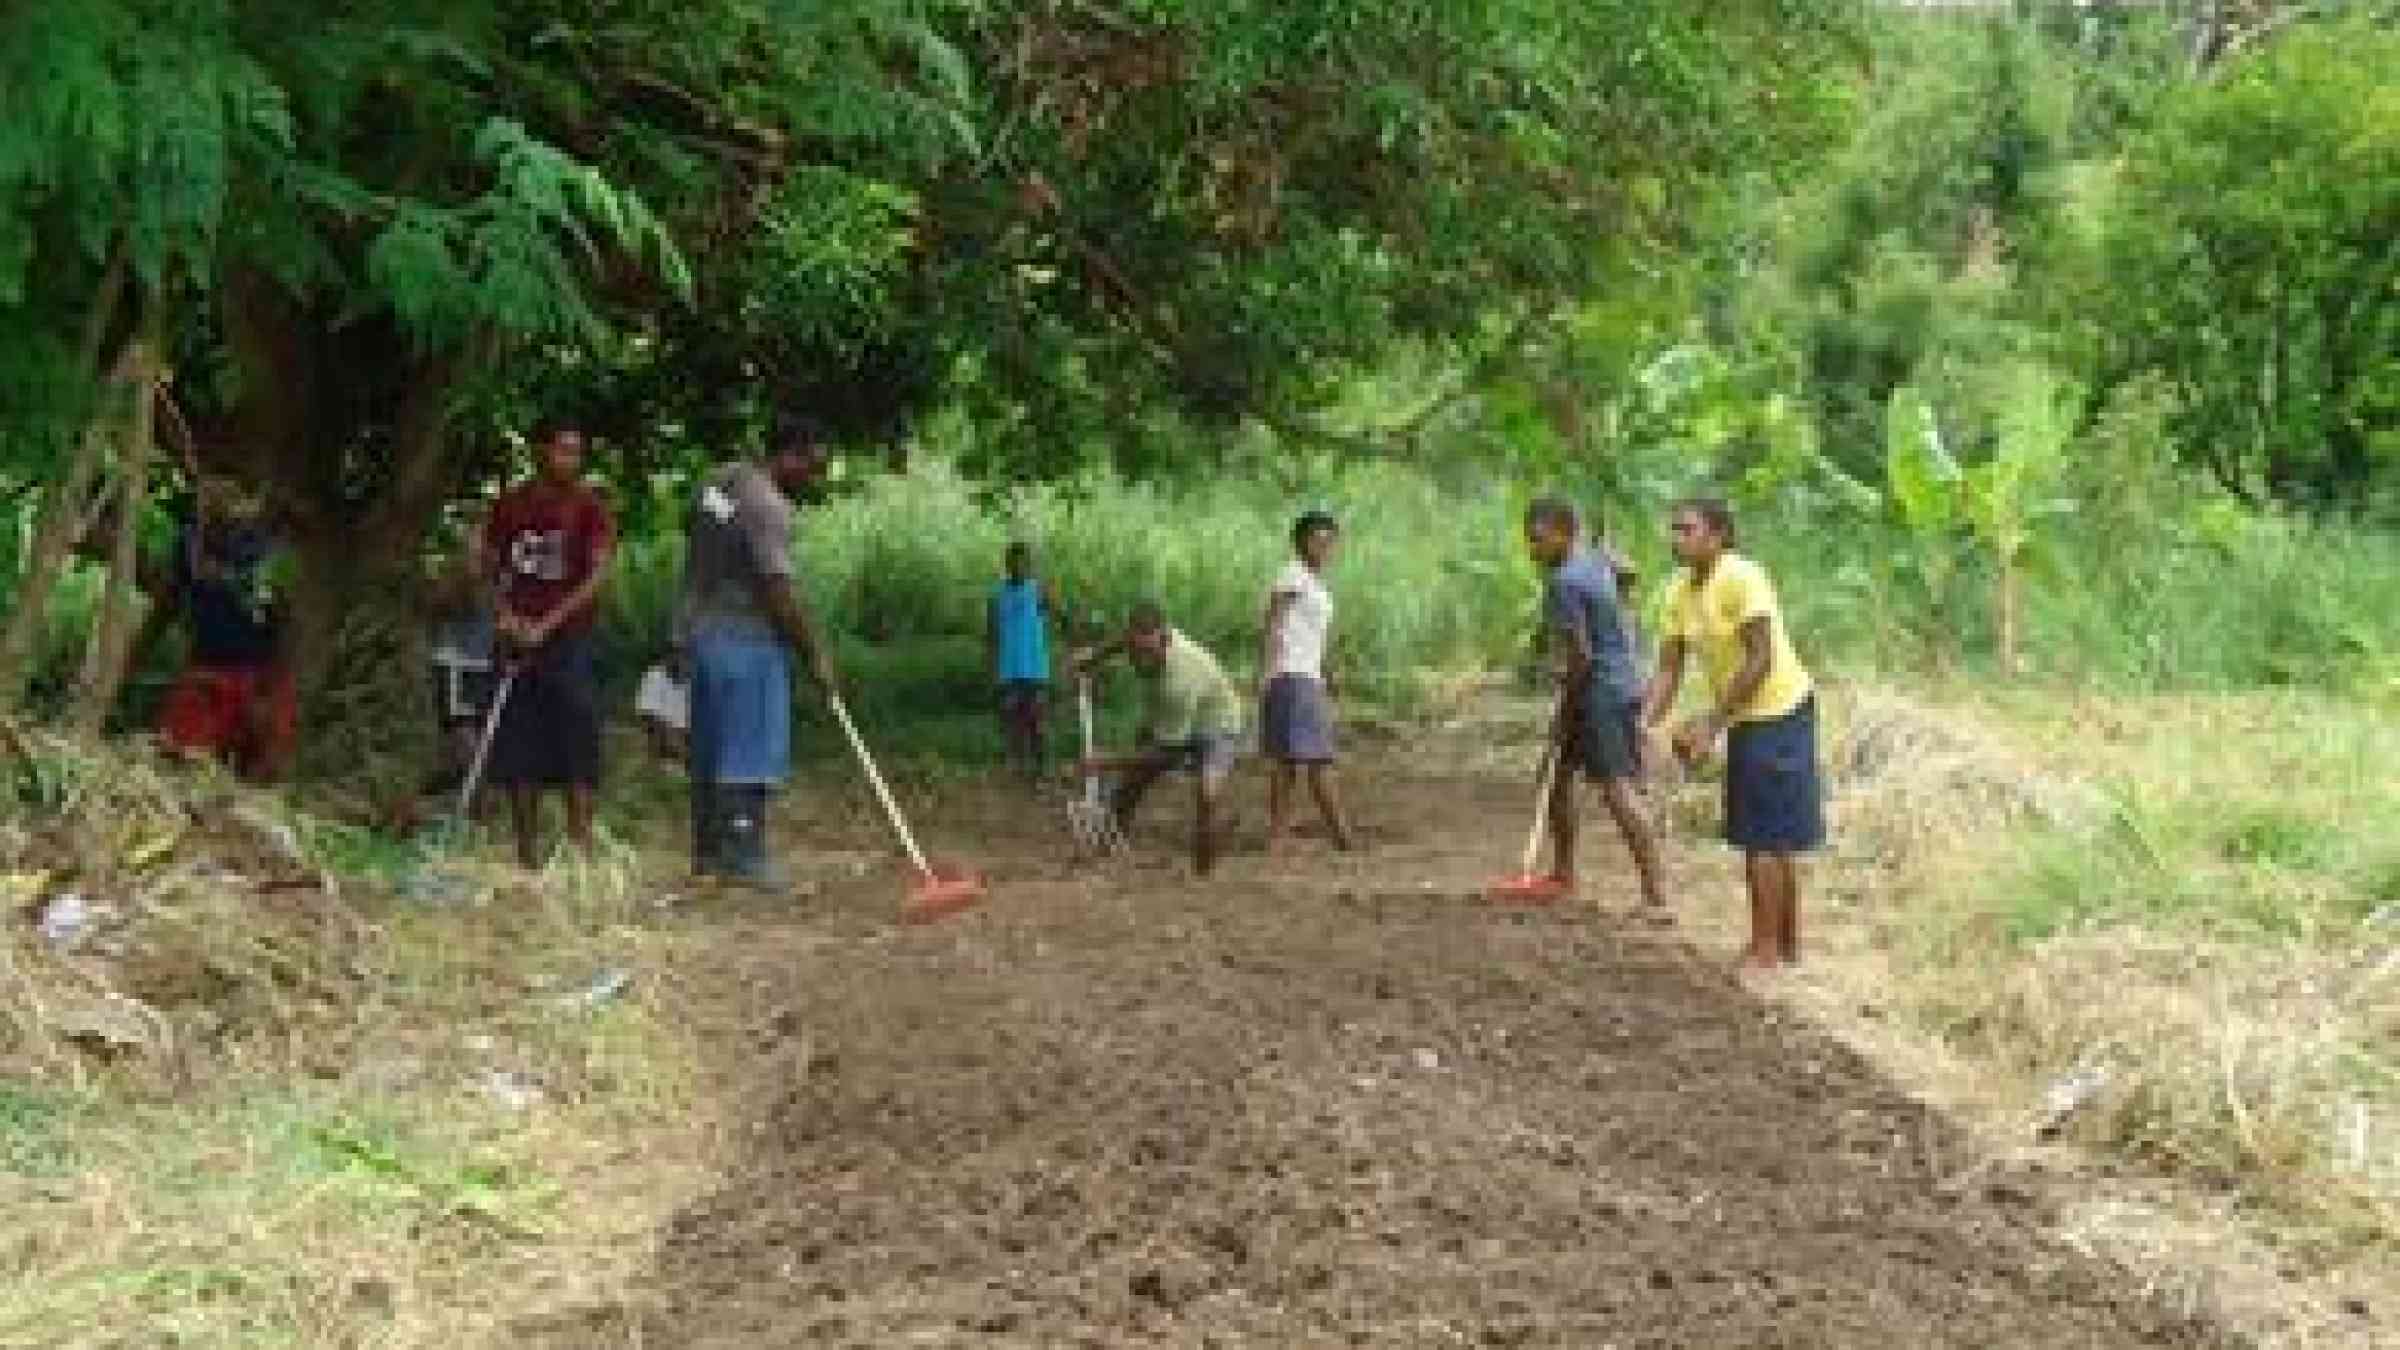 Photo by Vinaka Fiji Villagers are involved in Food Bank planning and preparation